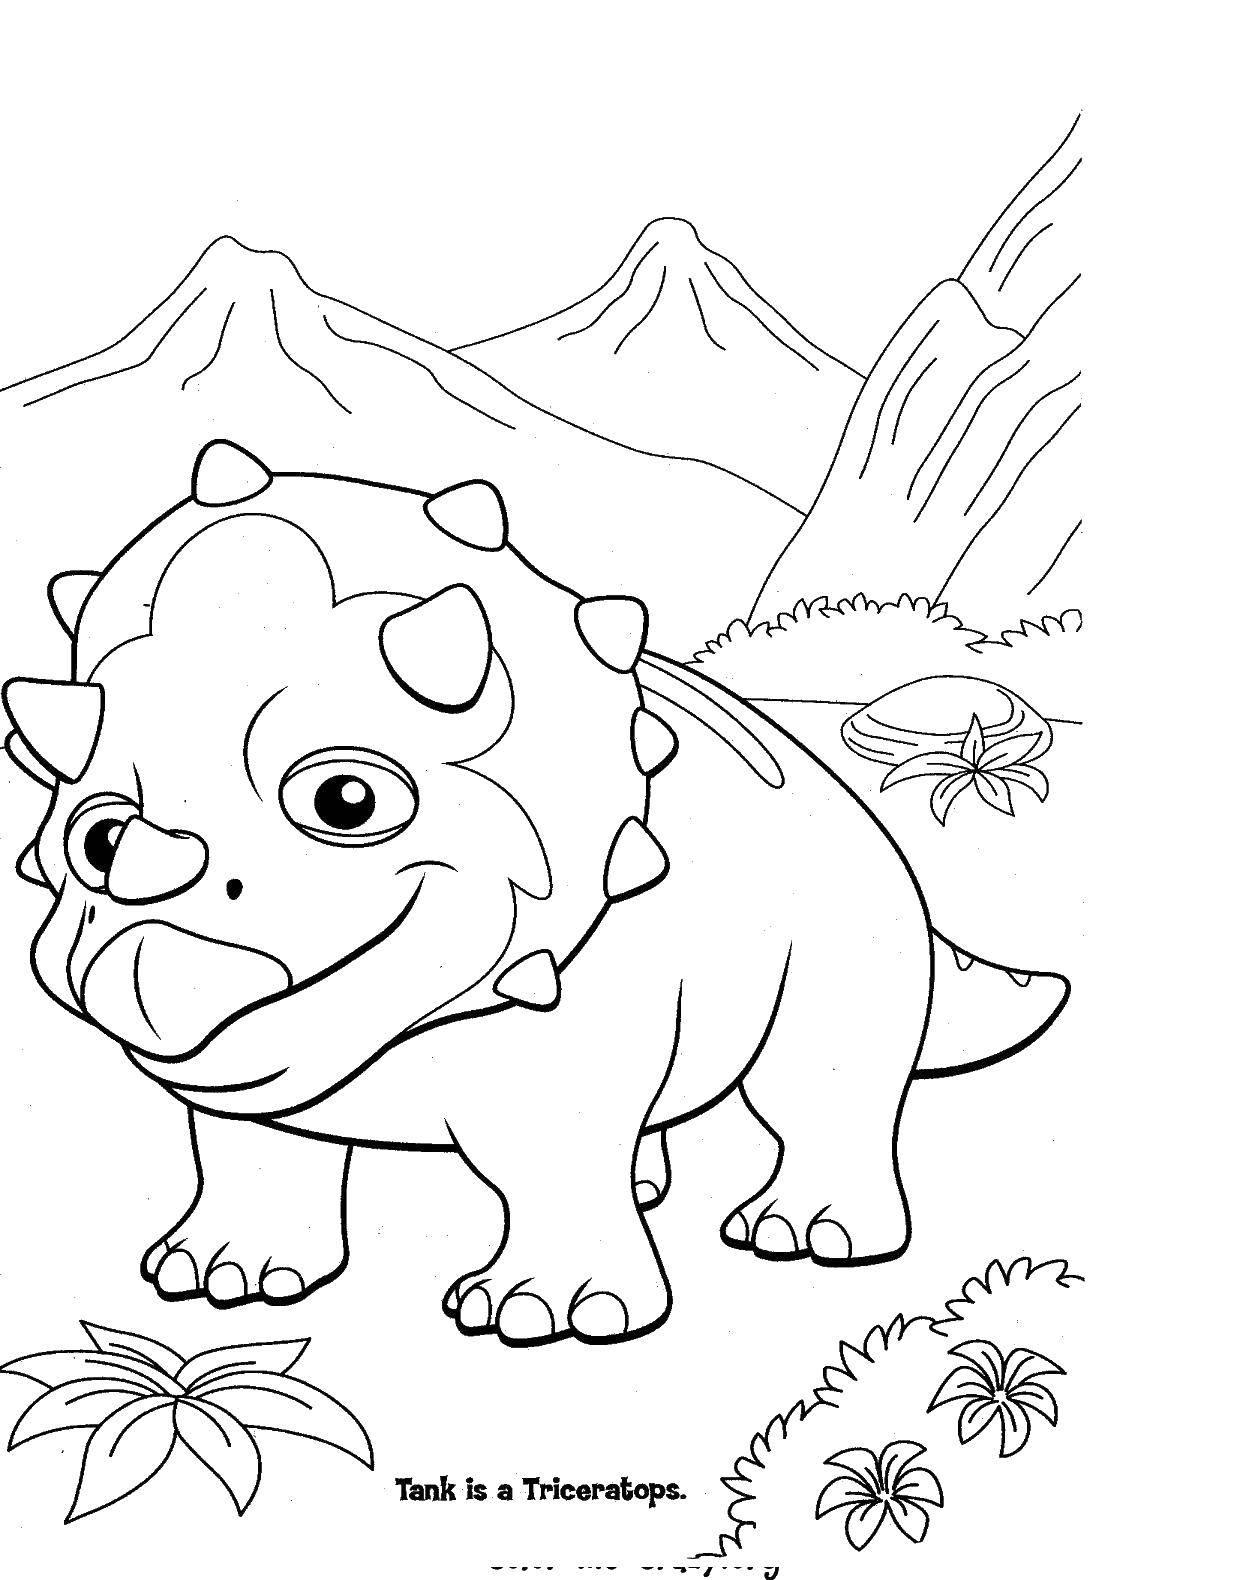 Coloring Triceratops. Category Jurassic Park. Tags:  Jurassic Park, dinosaurs, Triceratops.